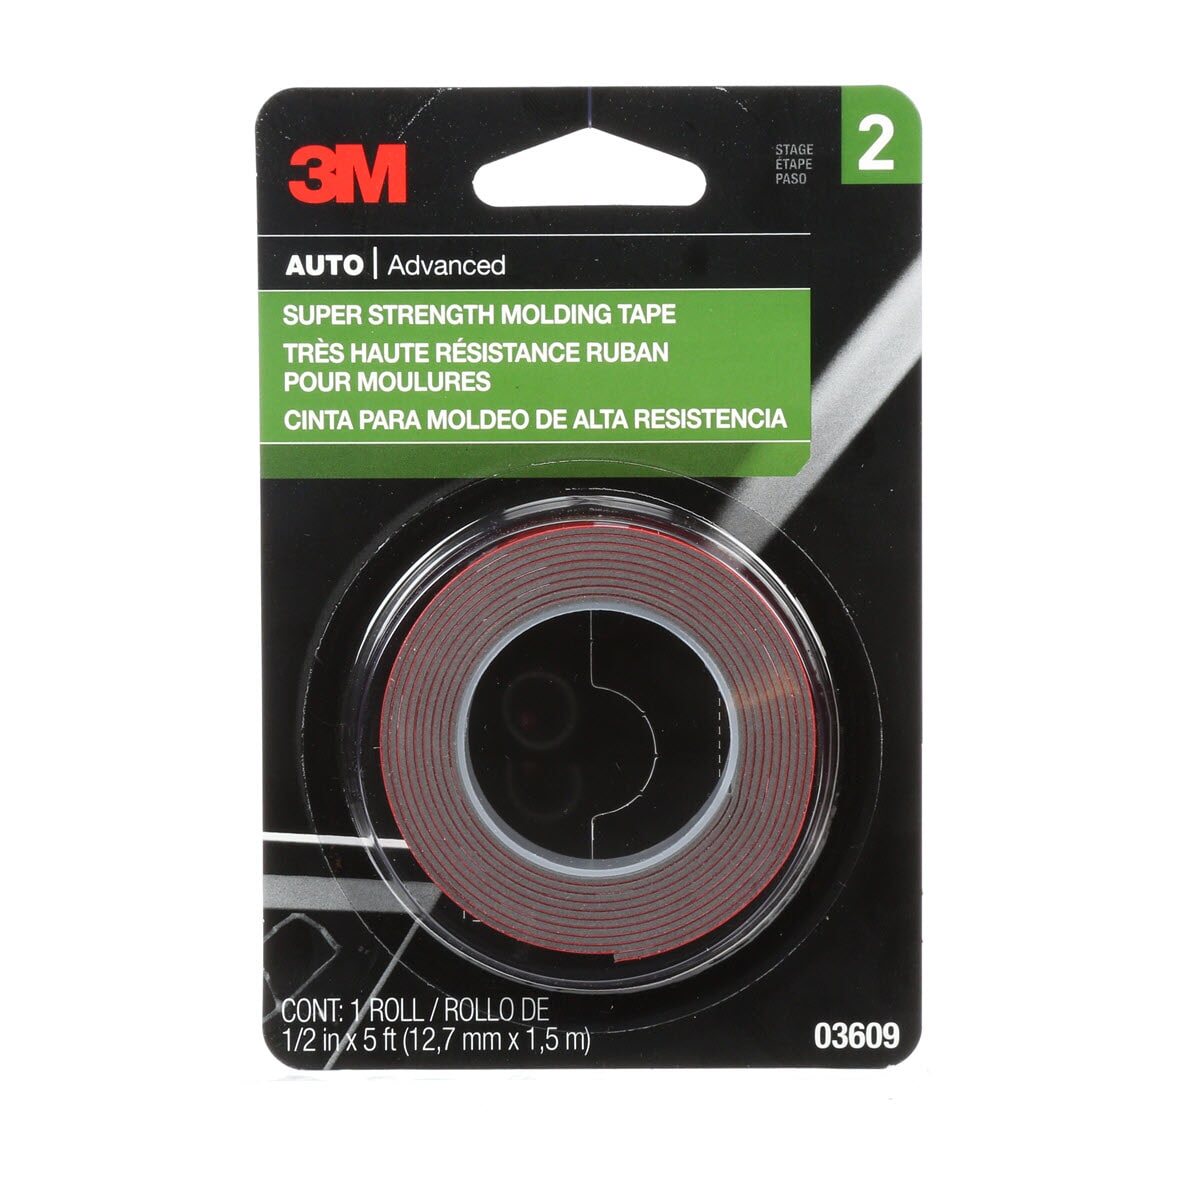 3M 7000000533 Super Strength Molding Tape, 5 ft L x 1/2 in W, 0.045 in THK, Acrylic Adhesive, Black